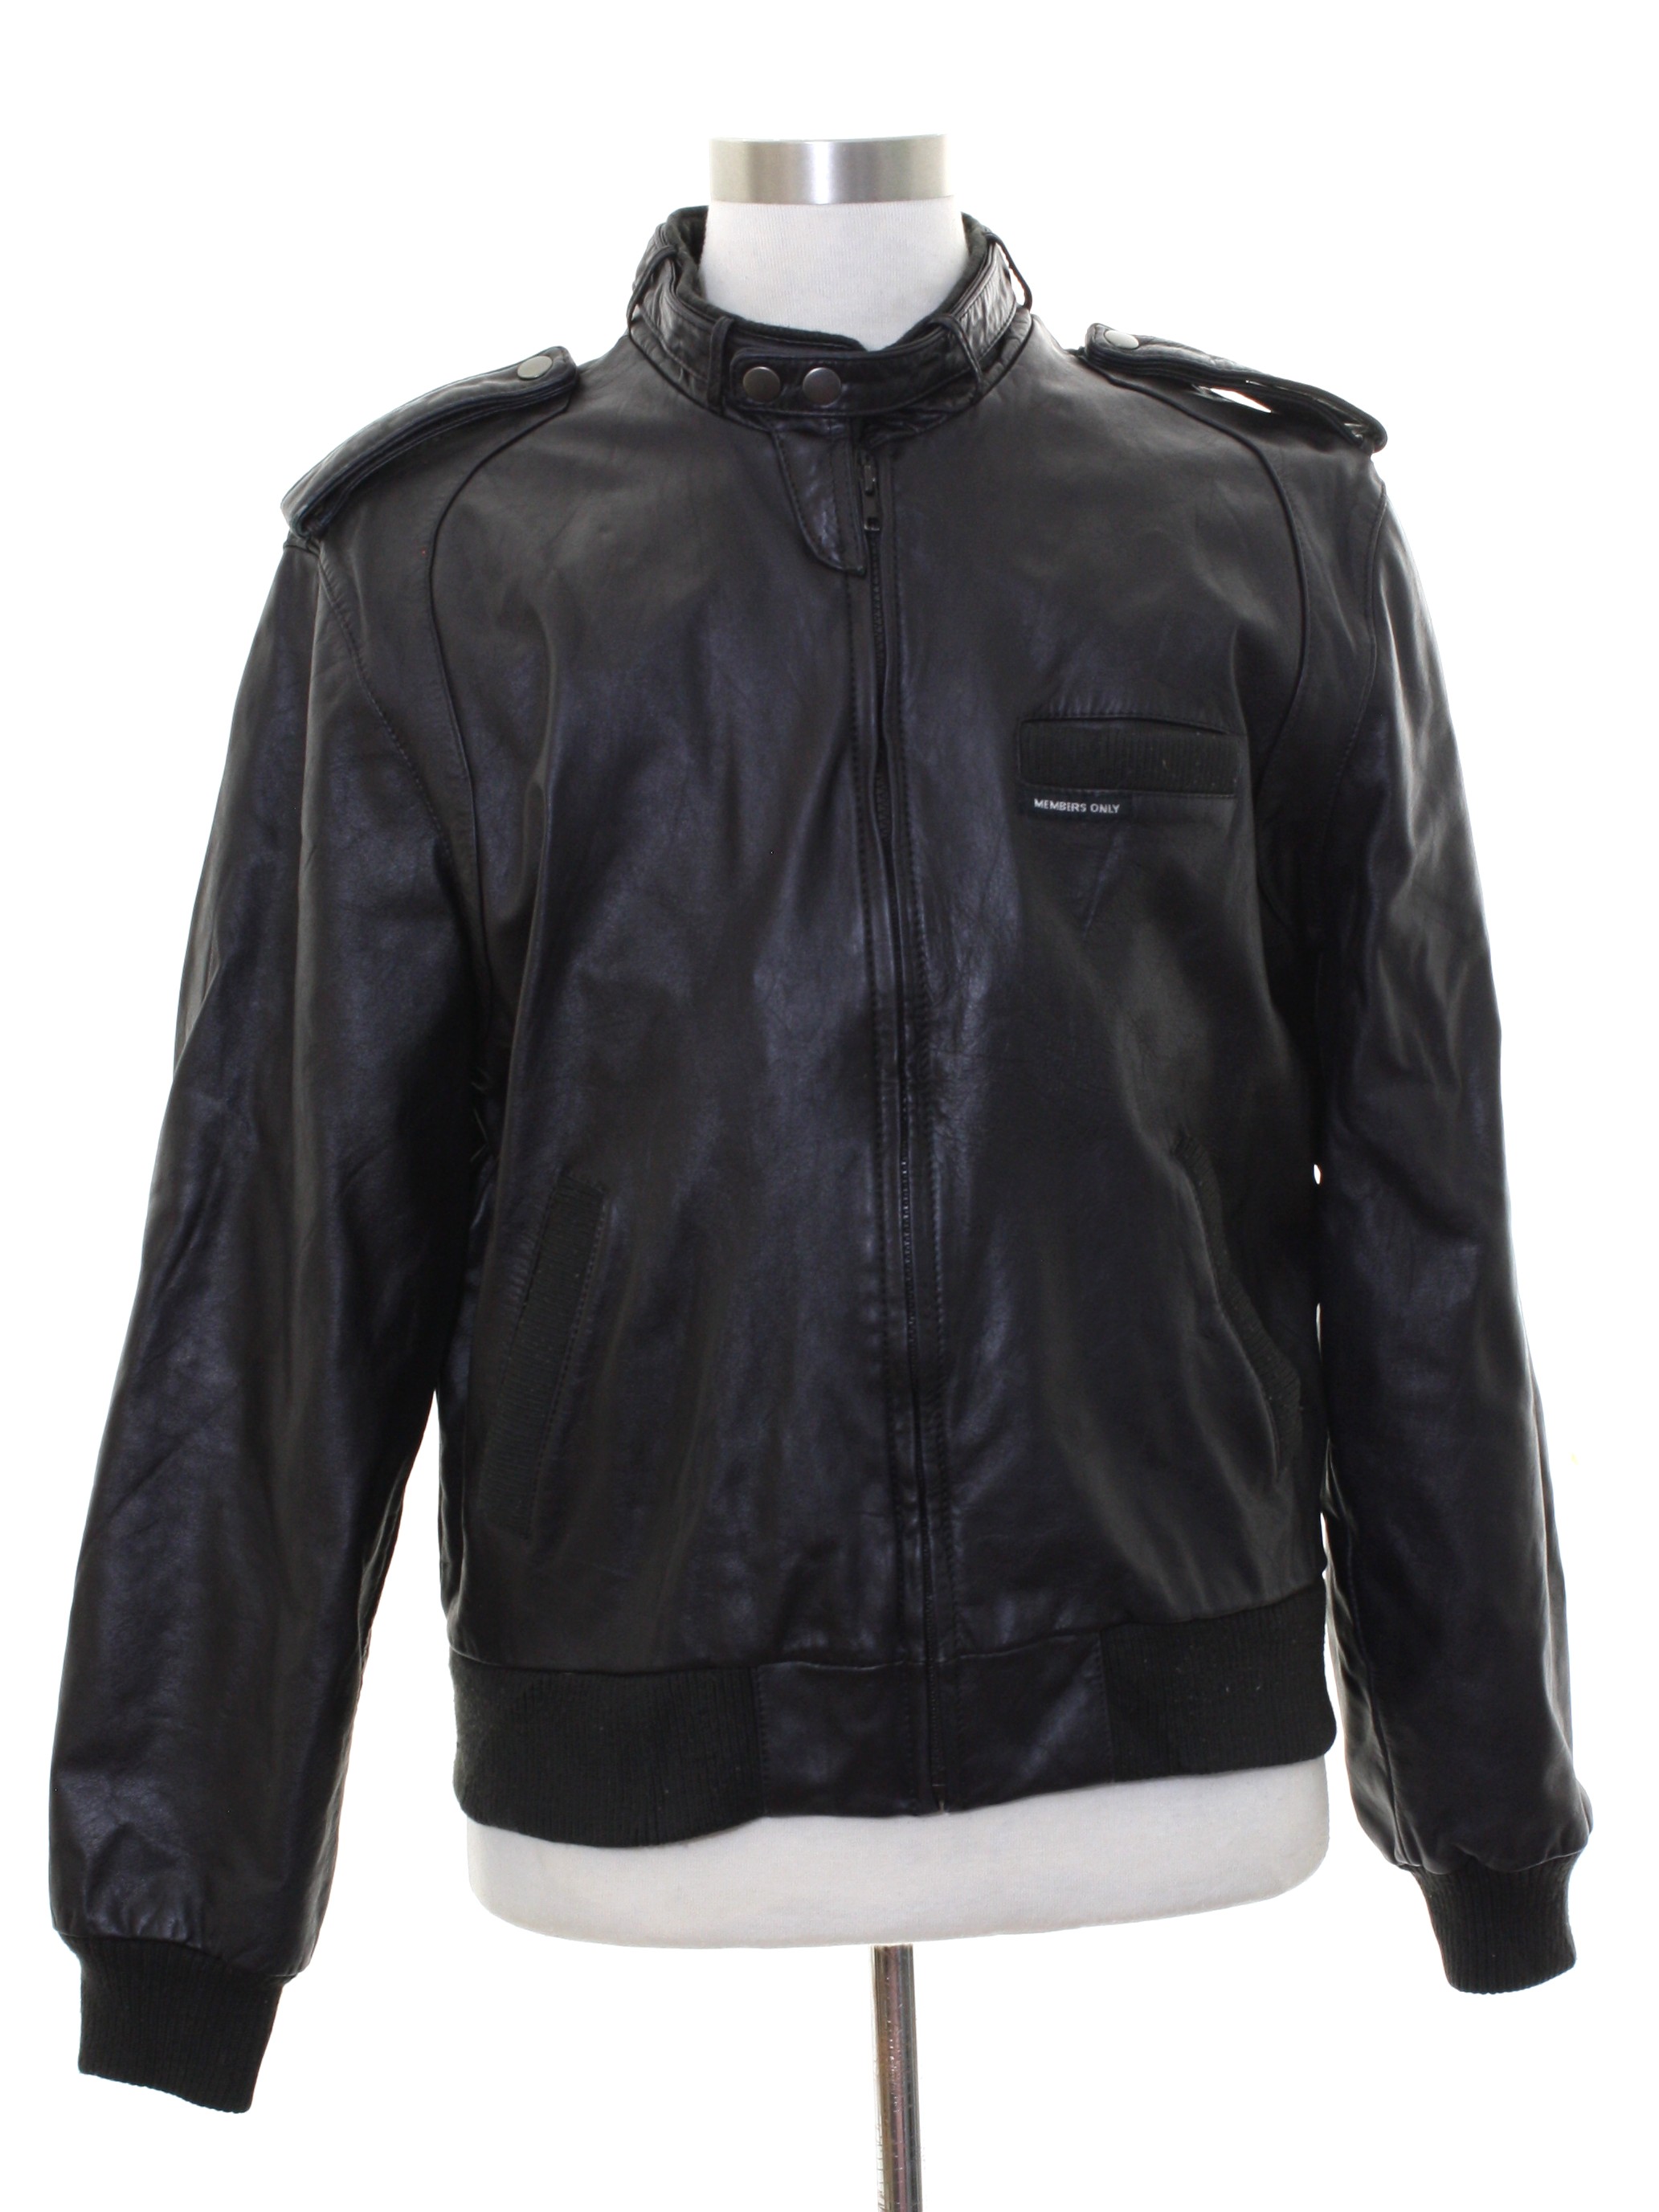 Retro 80's Leather Jacket: Late 80s or Early 90s -Members Only- Mens